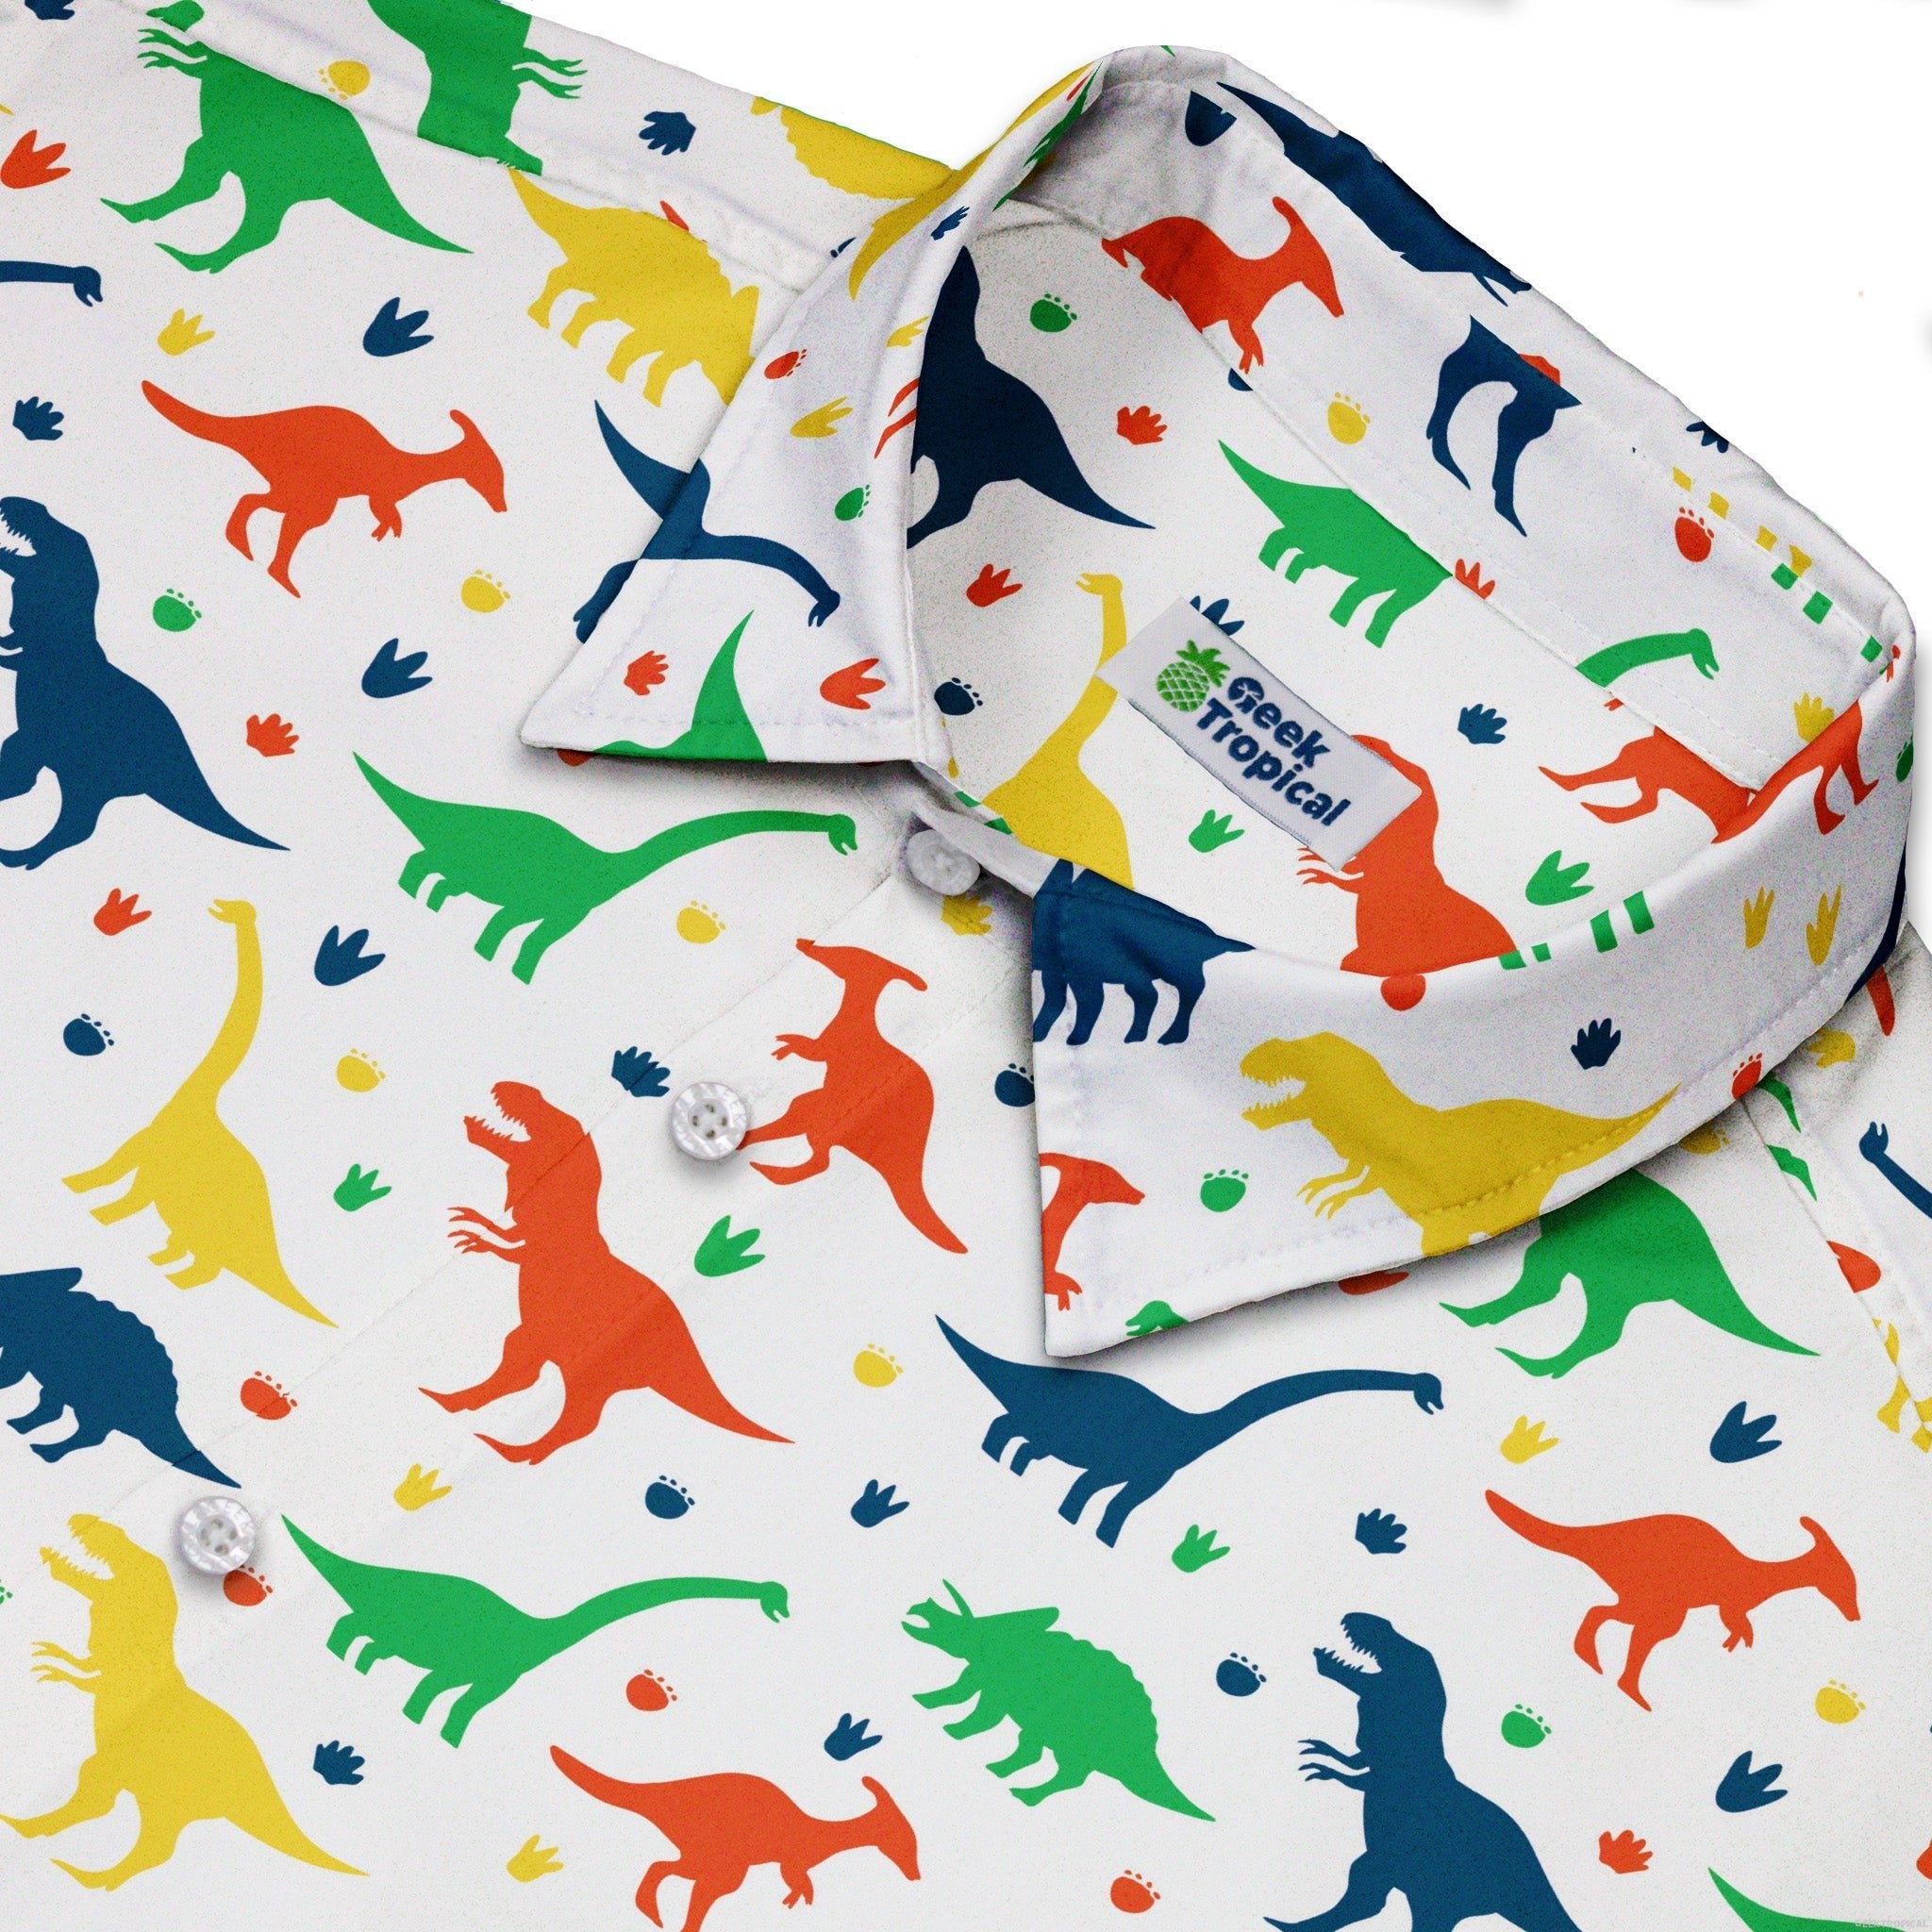 Colorful Dinosaur Silhouettes White Button Up Shirt - adult sizing - dinosaur print -